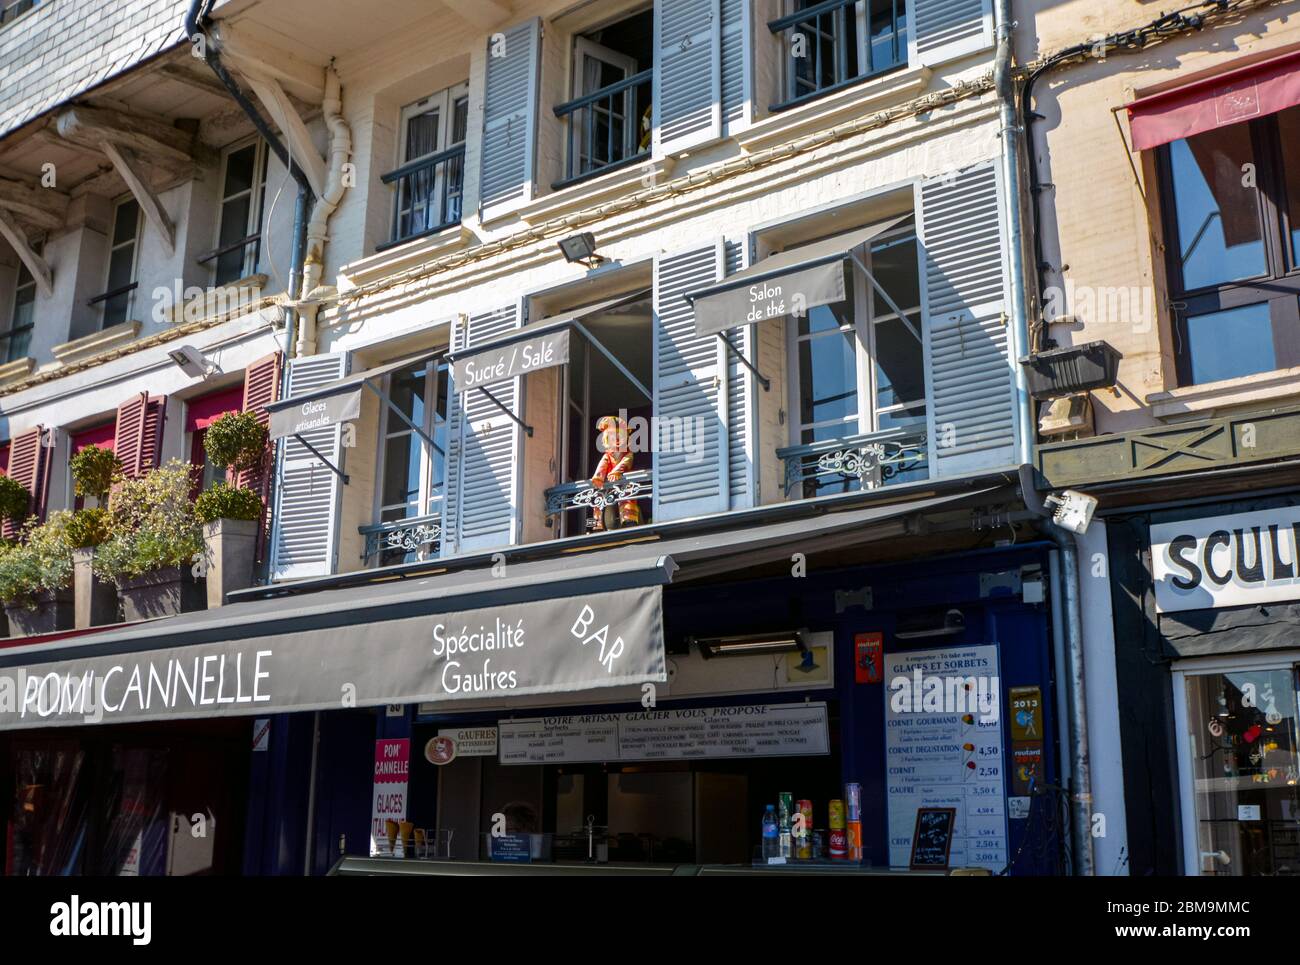 A clown doll looks down from a window above a sidewalk cafe in the seaside Normandy village of Honfleur France Stock Photo